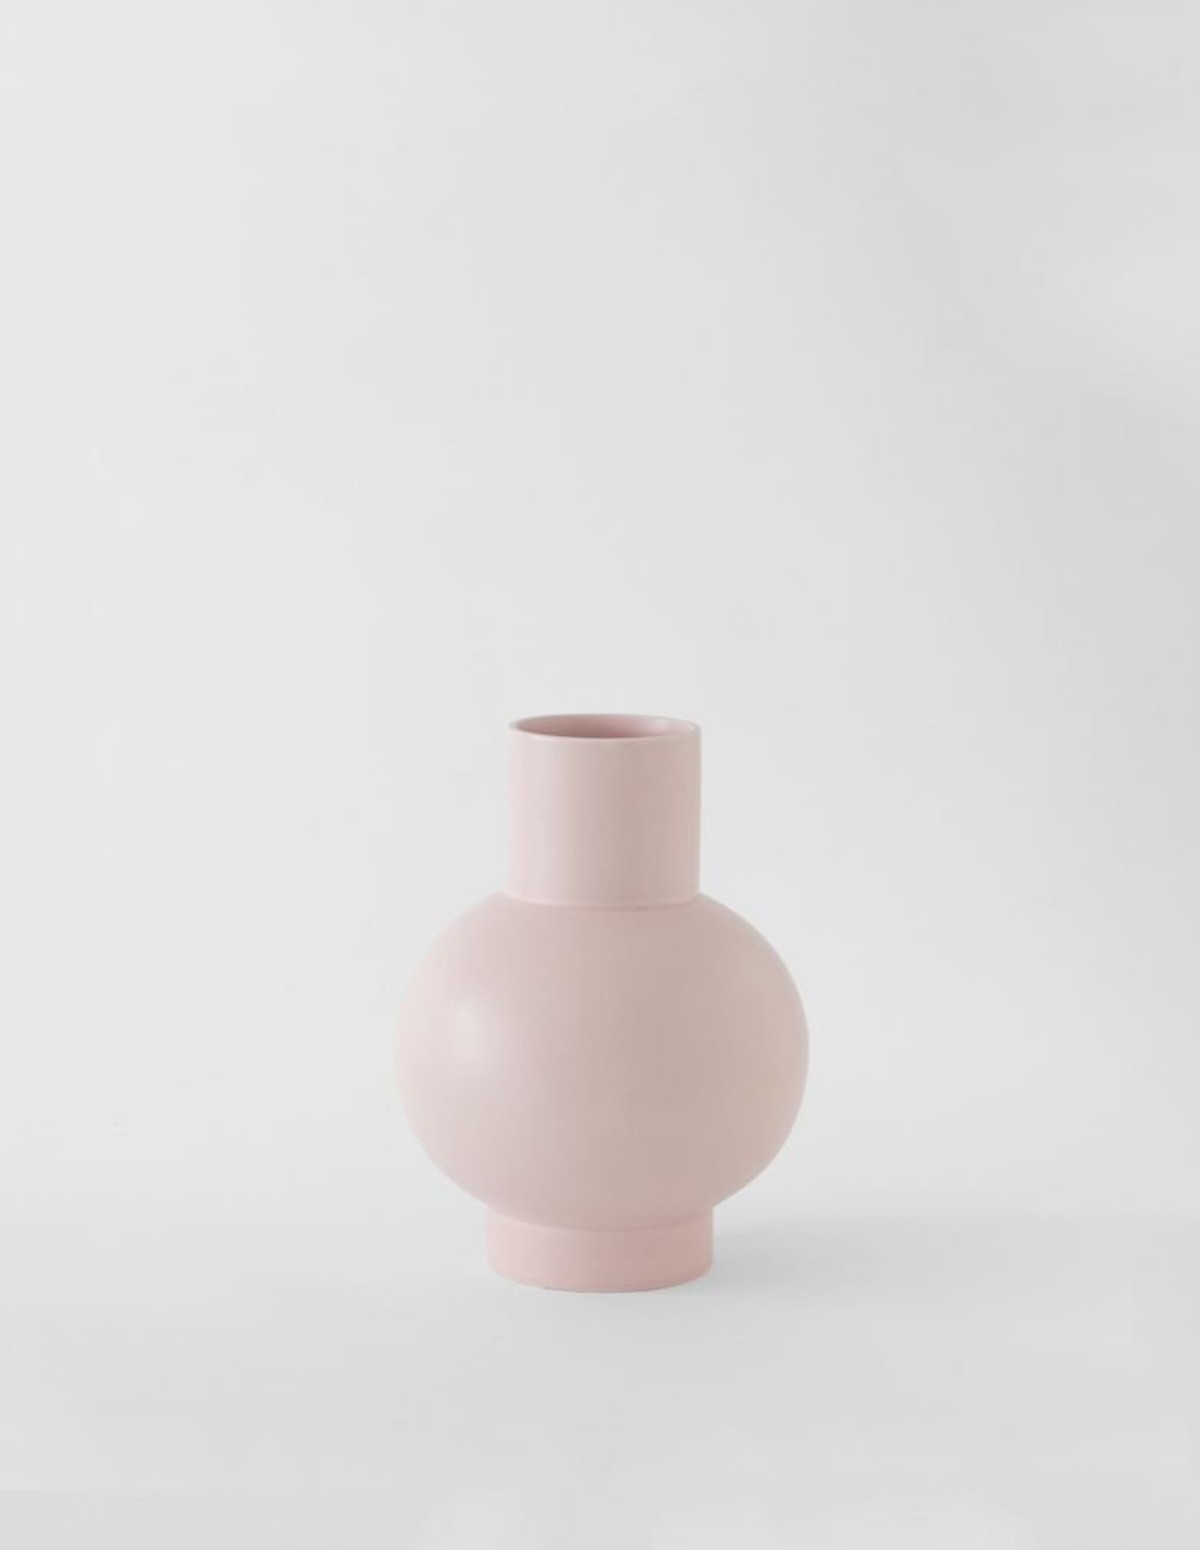 Raawii Small Vase - CORAL BLUSH